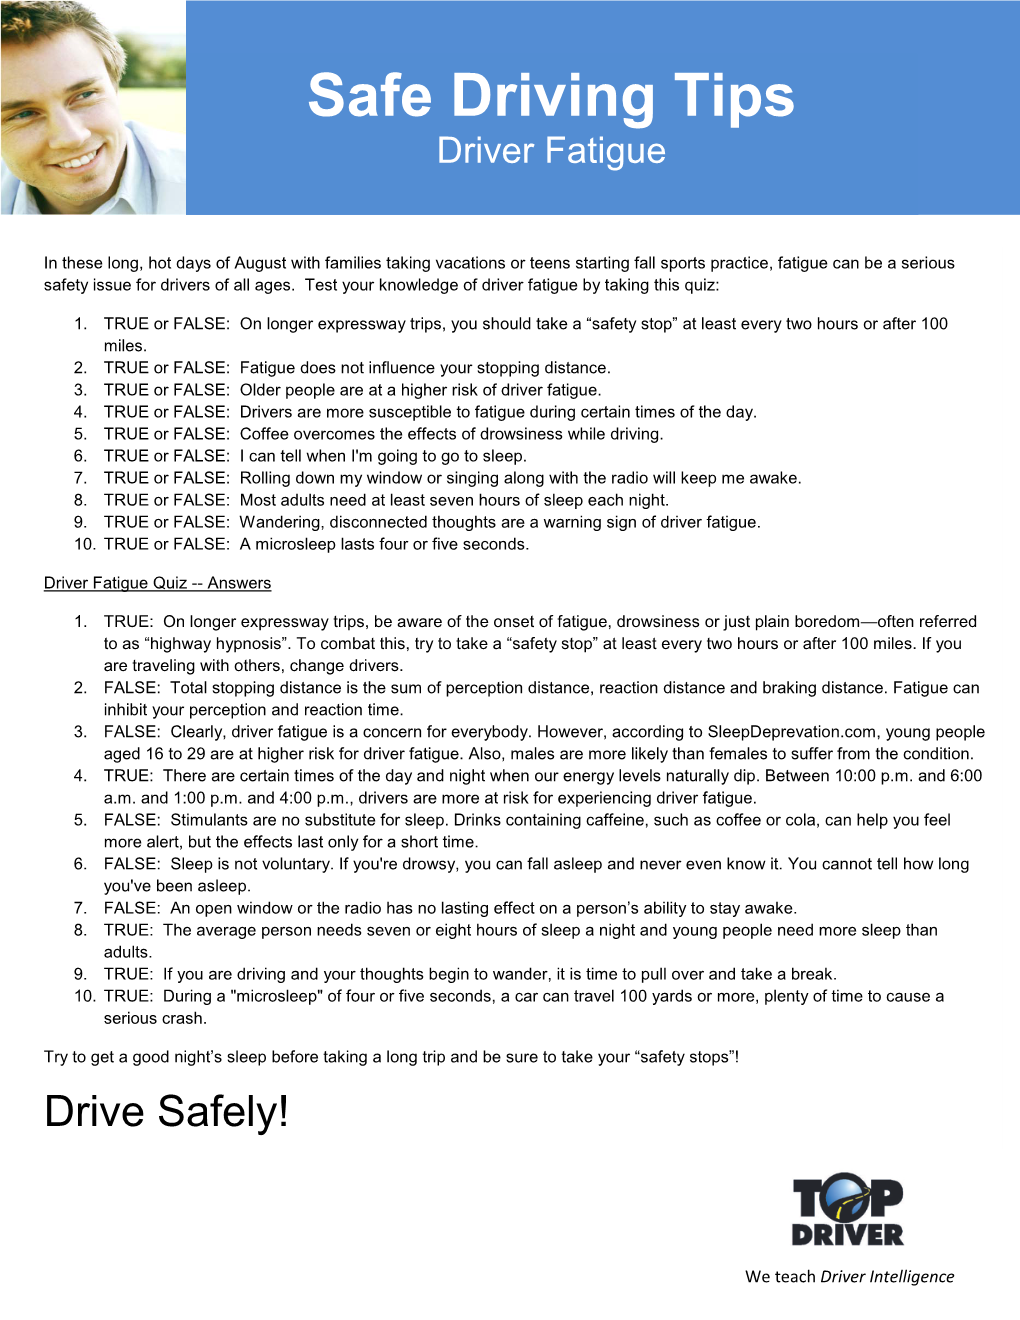 Safe Driving Tips Driver Fatigue